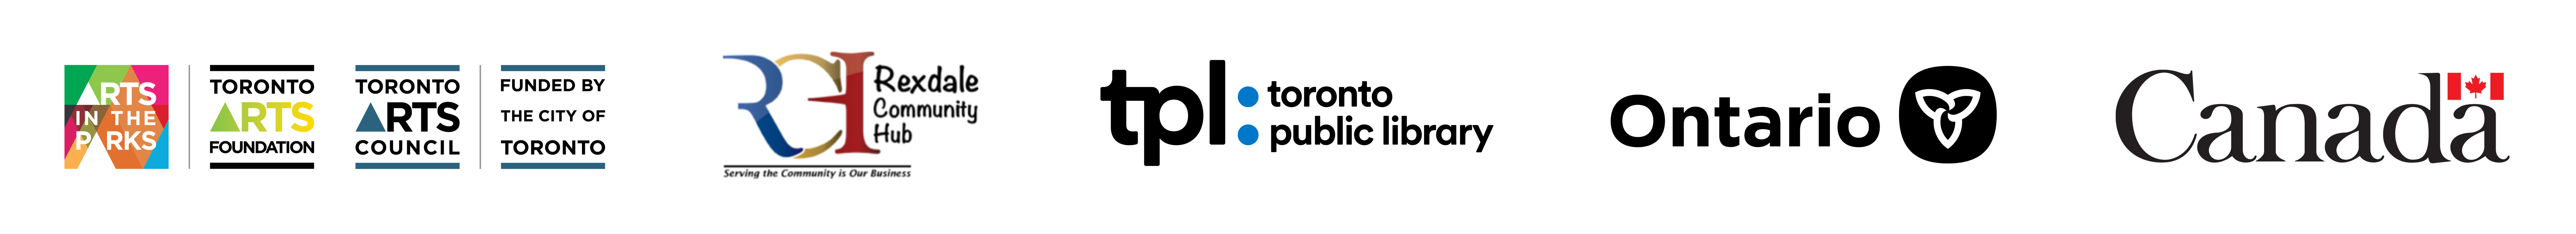 Logo banner with logos for Arts in the Park, Toronto Arts Foundation, Toronto Arts Council, Toronto Public Library and the Government of Ontario and Canada